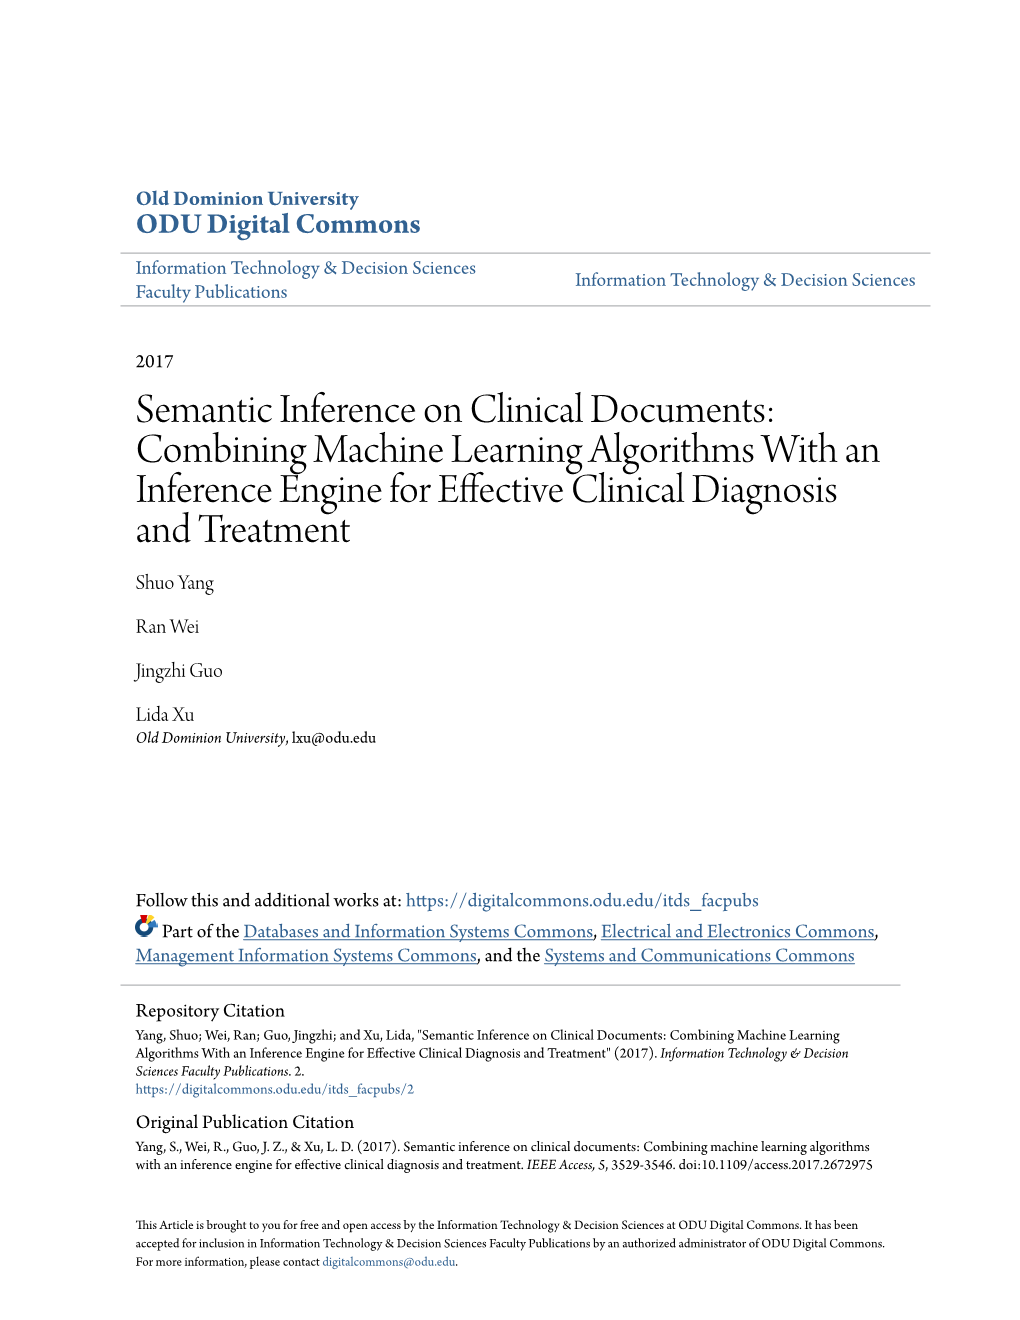 Combining Machine Learning Algorithms with an Inference Engine for Effective Clinical Diagnosis and Treatment Shuo Yang